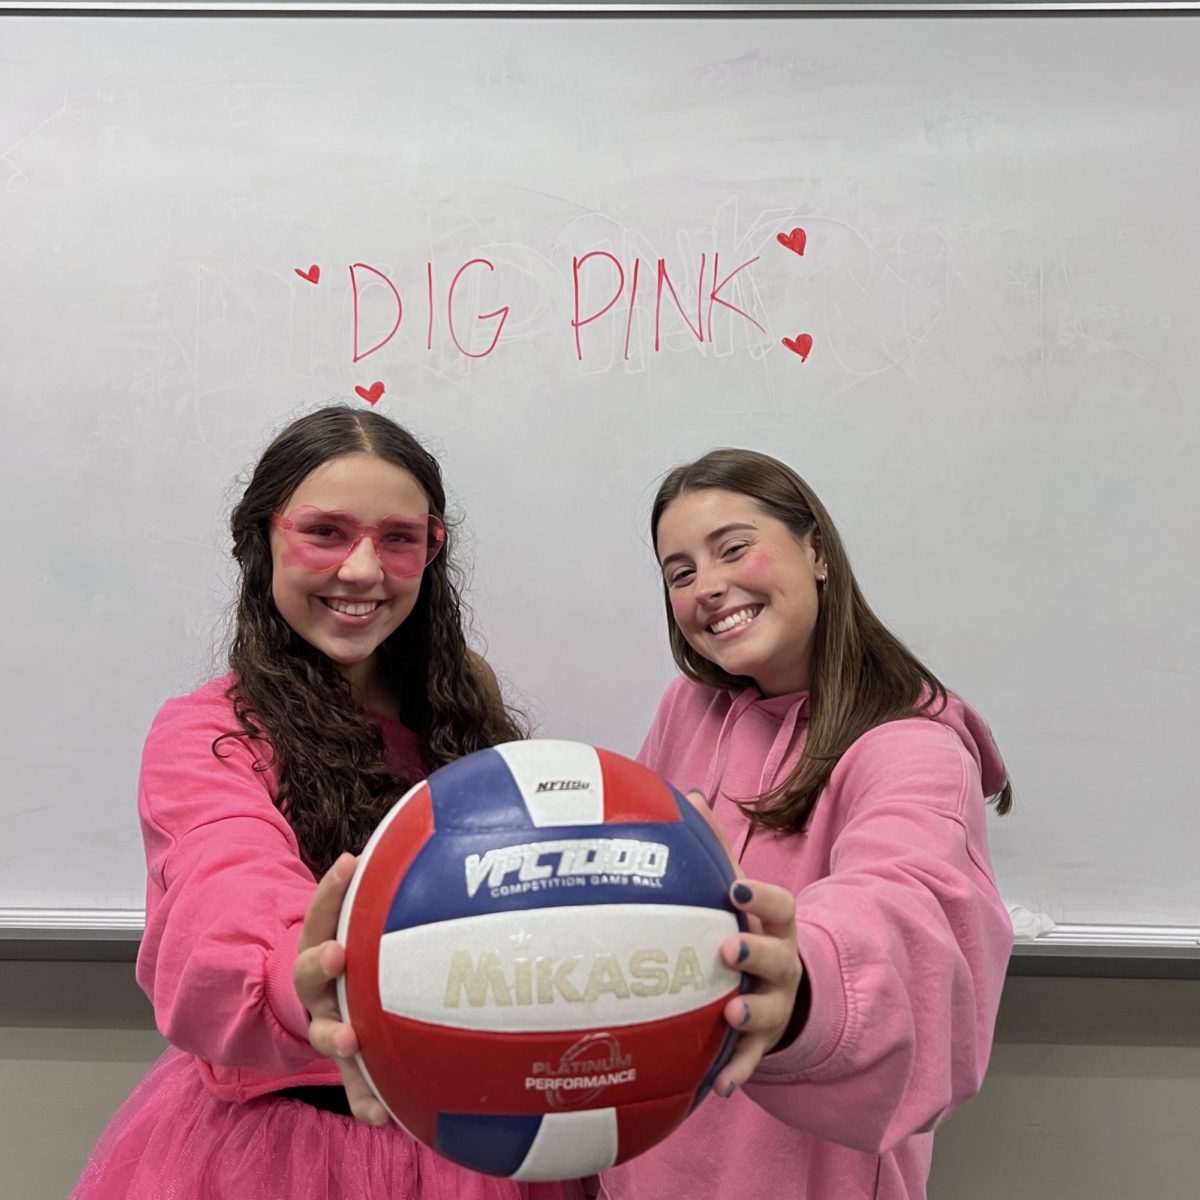 In+honor+of+Dig-Pink%2C+players+Maddie+Fitzpatrick+and+Gabby+Pattie+dressed+in+pink+before+the+game.+